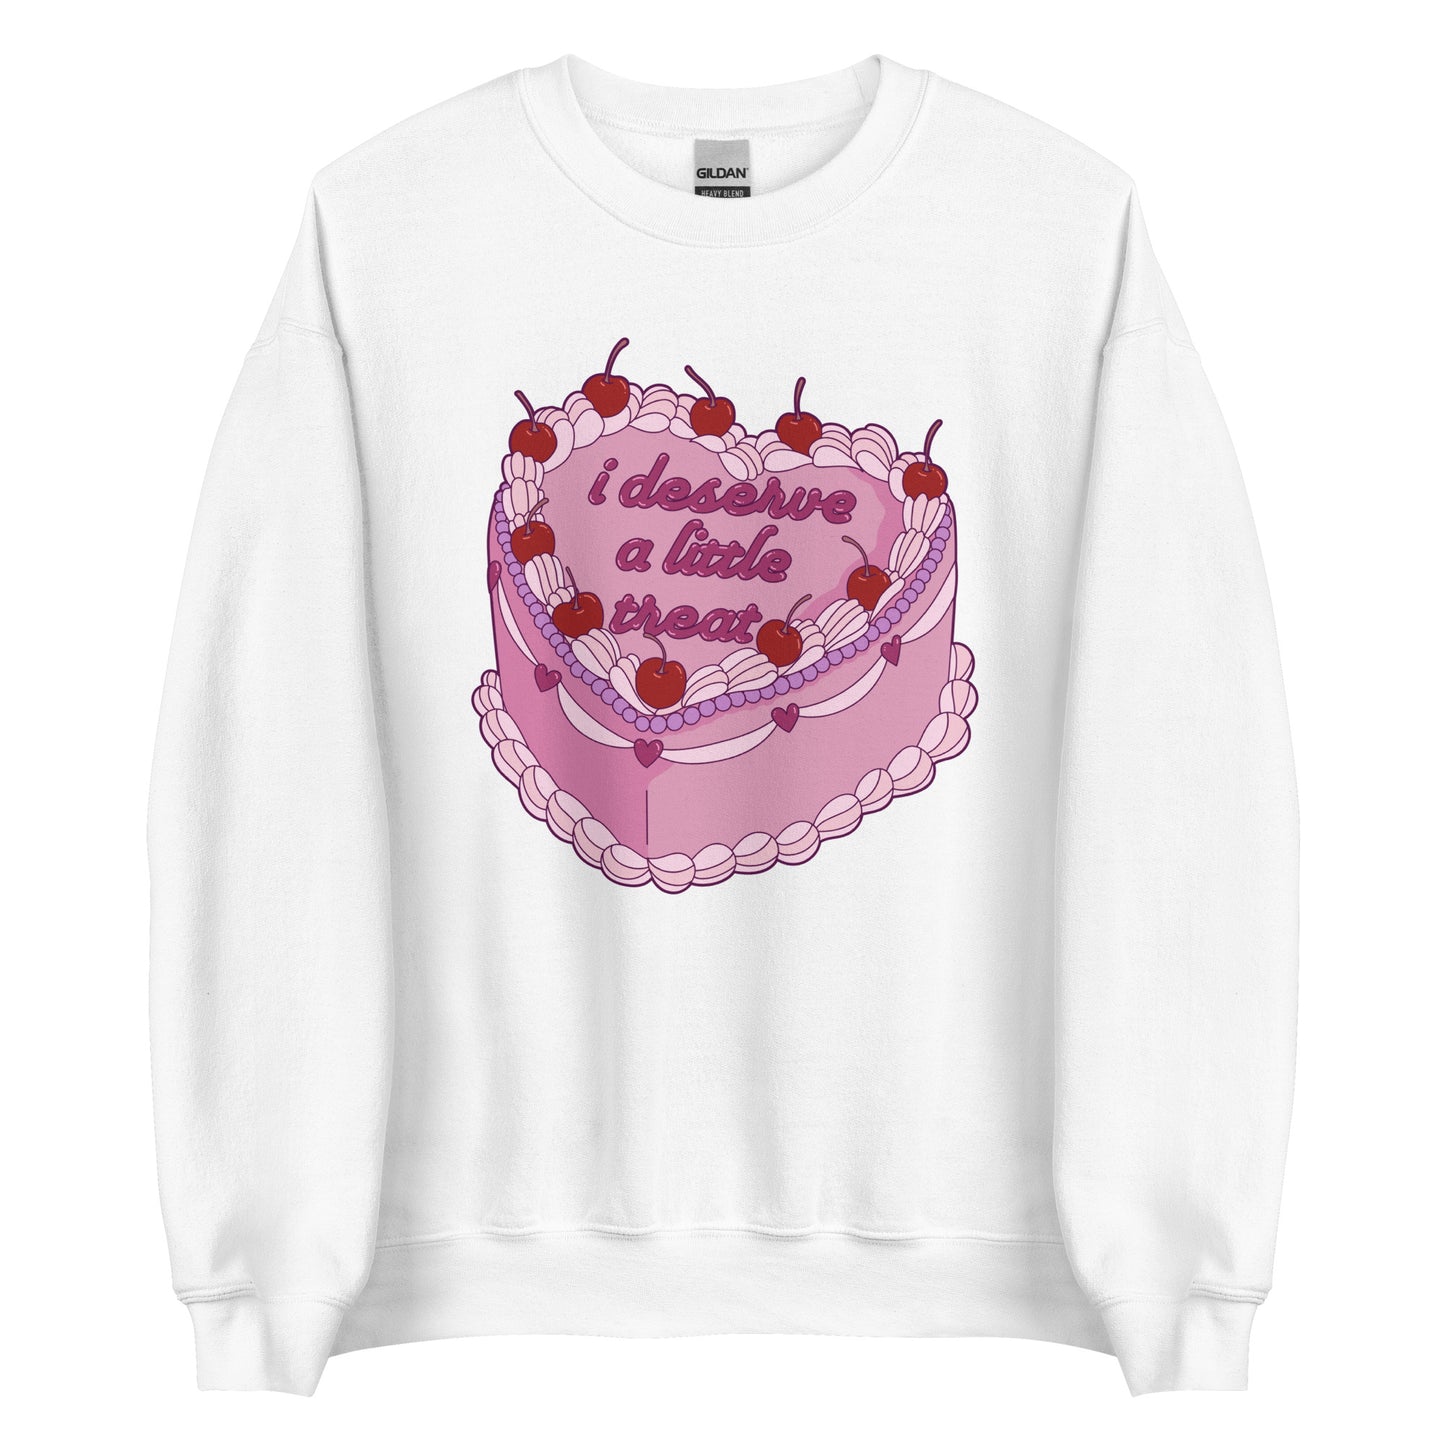 A white crewneck sweatshirt featuring an illustration of an elaborately decorated pink cake. Icing on the cake reads "i deserve a little treat" in a cursive font.